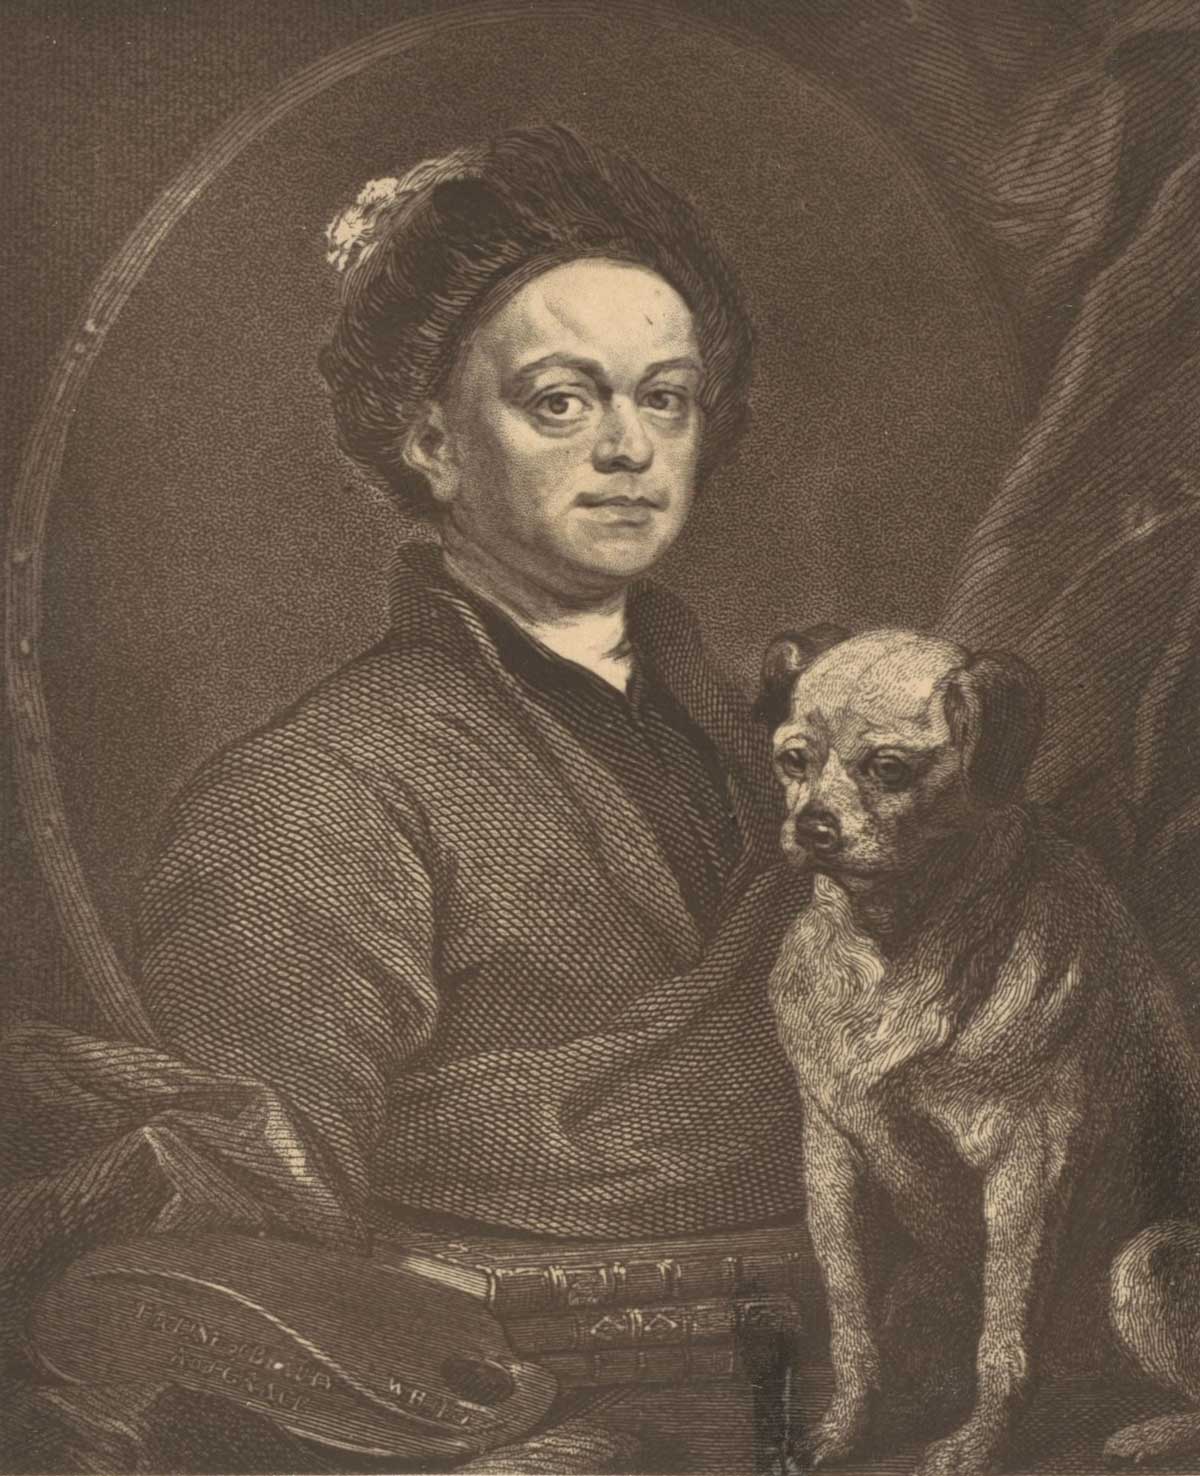 William Hogarth and his pug, self portrait. From the publication 'Leicester Square; its associations and its worthies', Tom Taylor, 1874. Rijksmuseum.